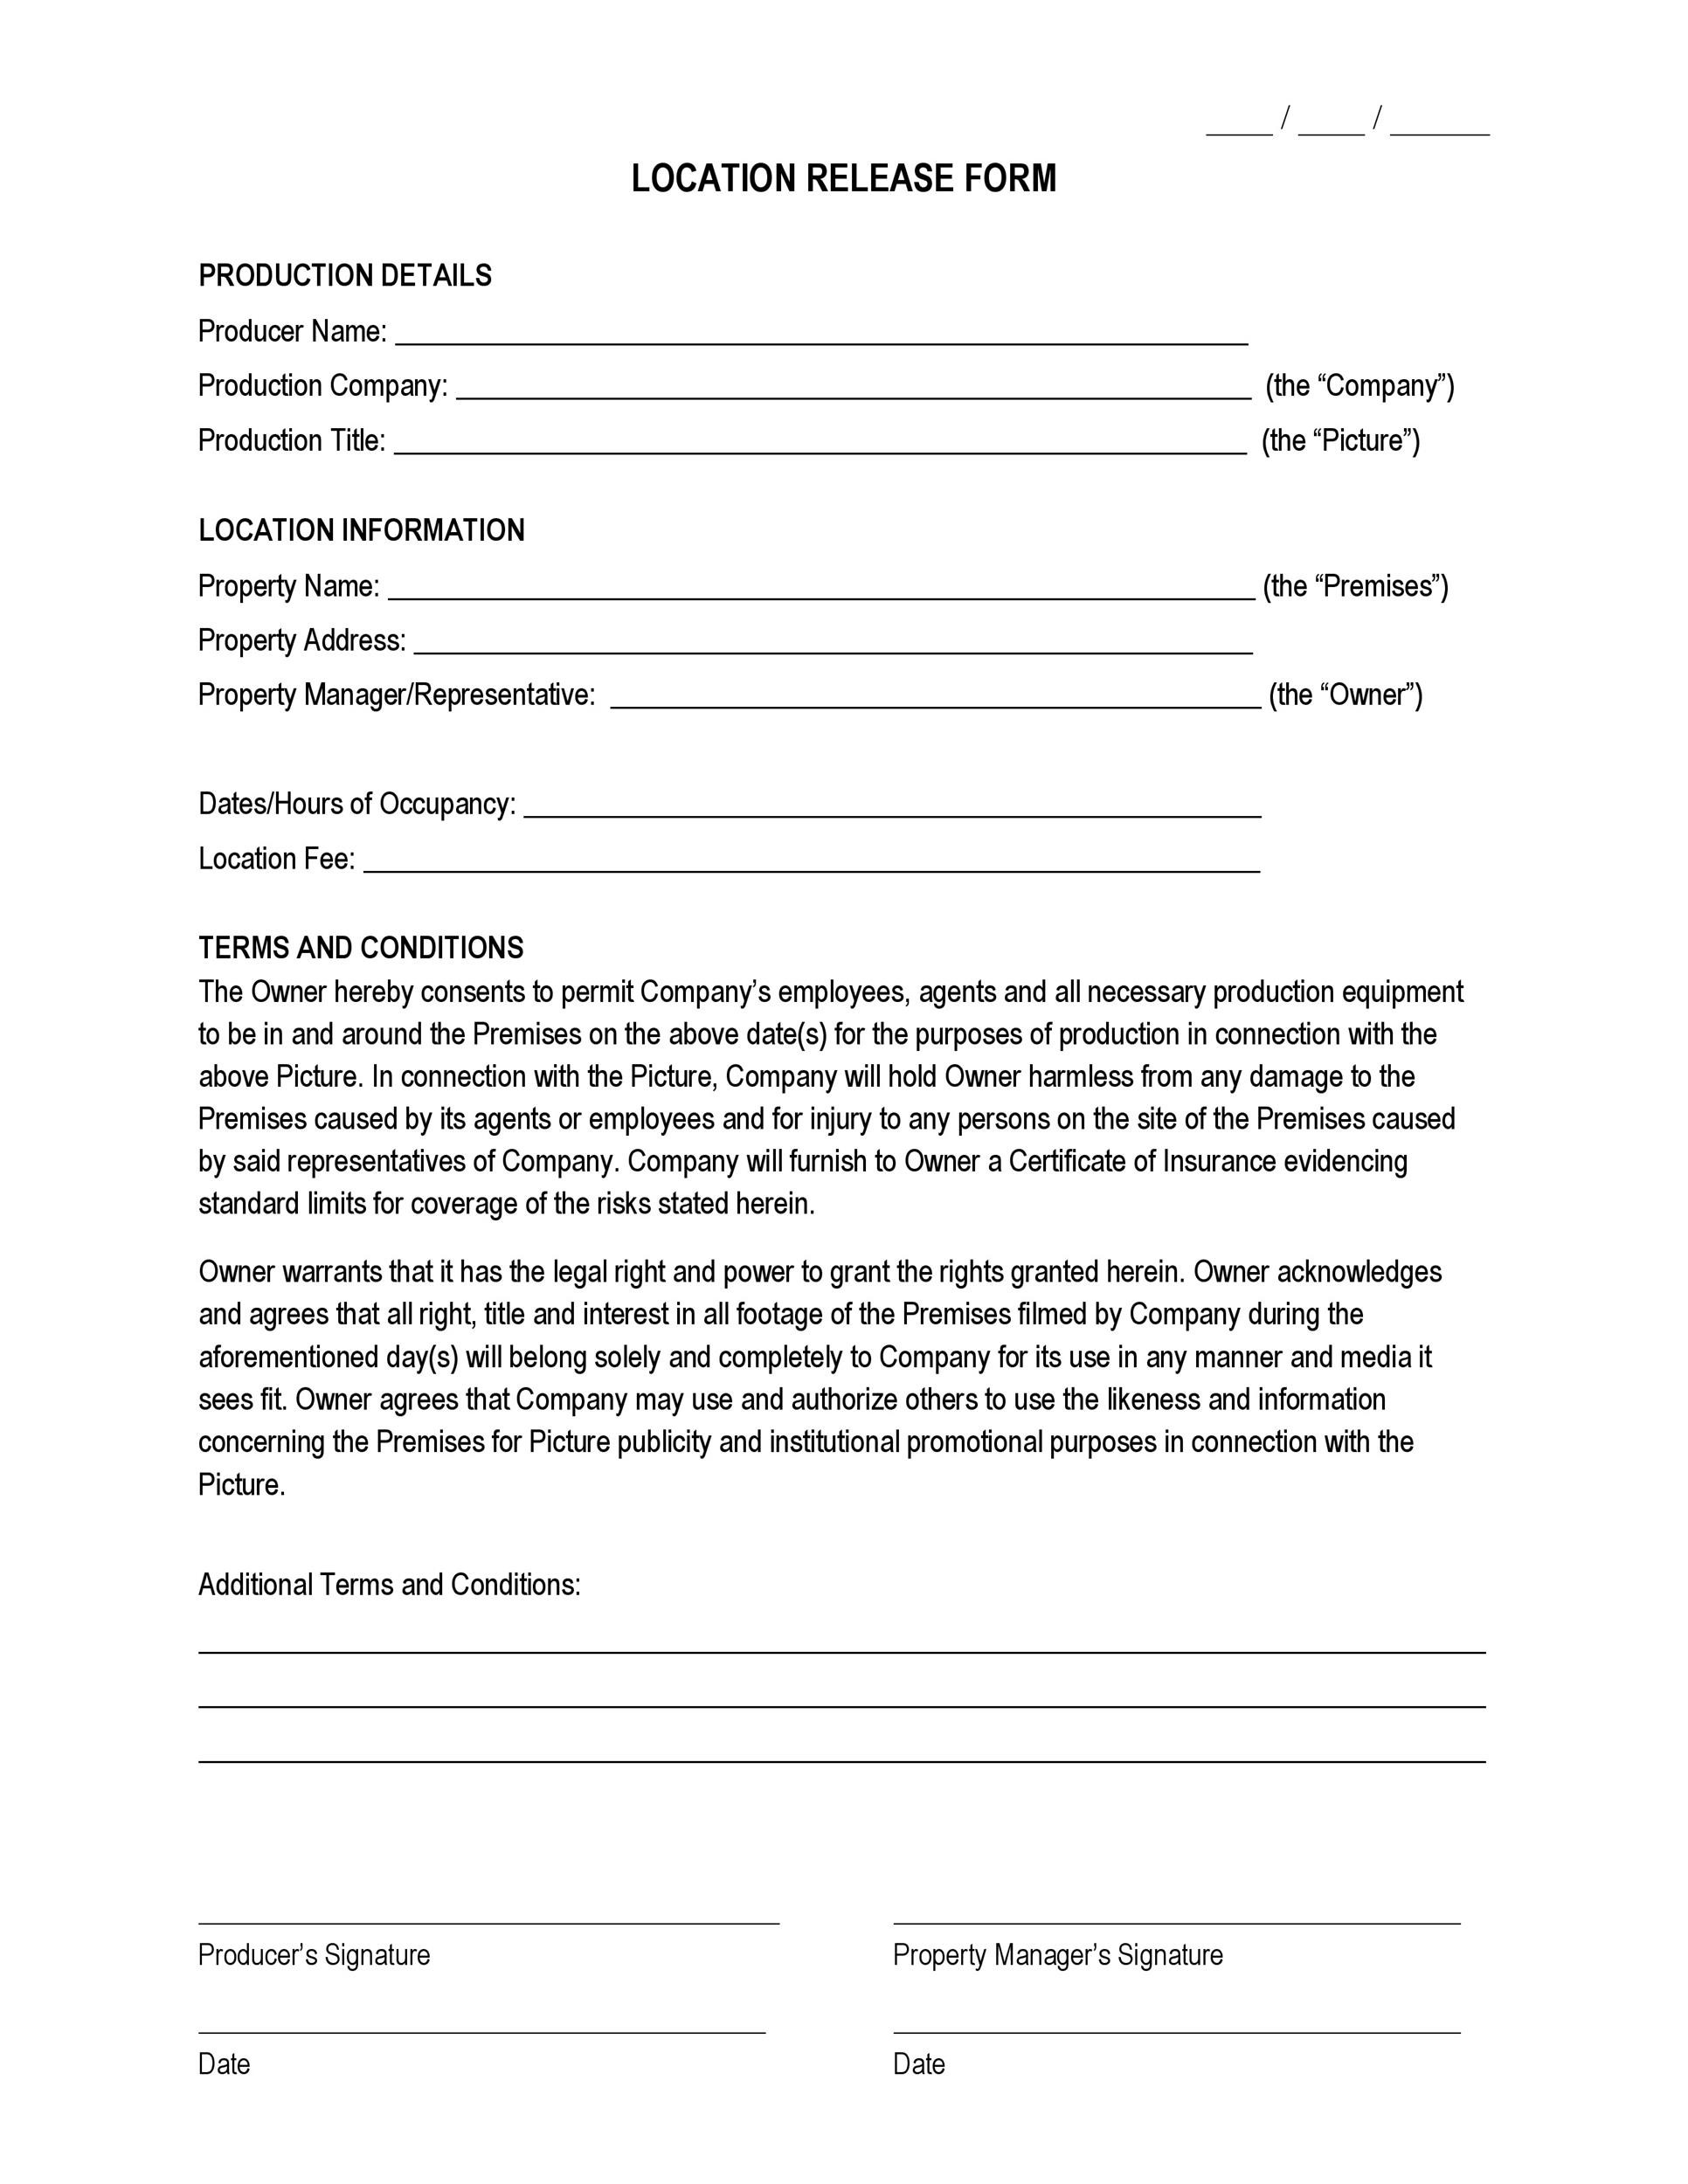 Location Release Form Template